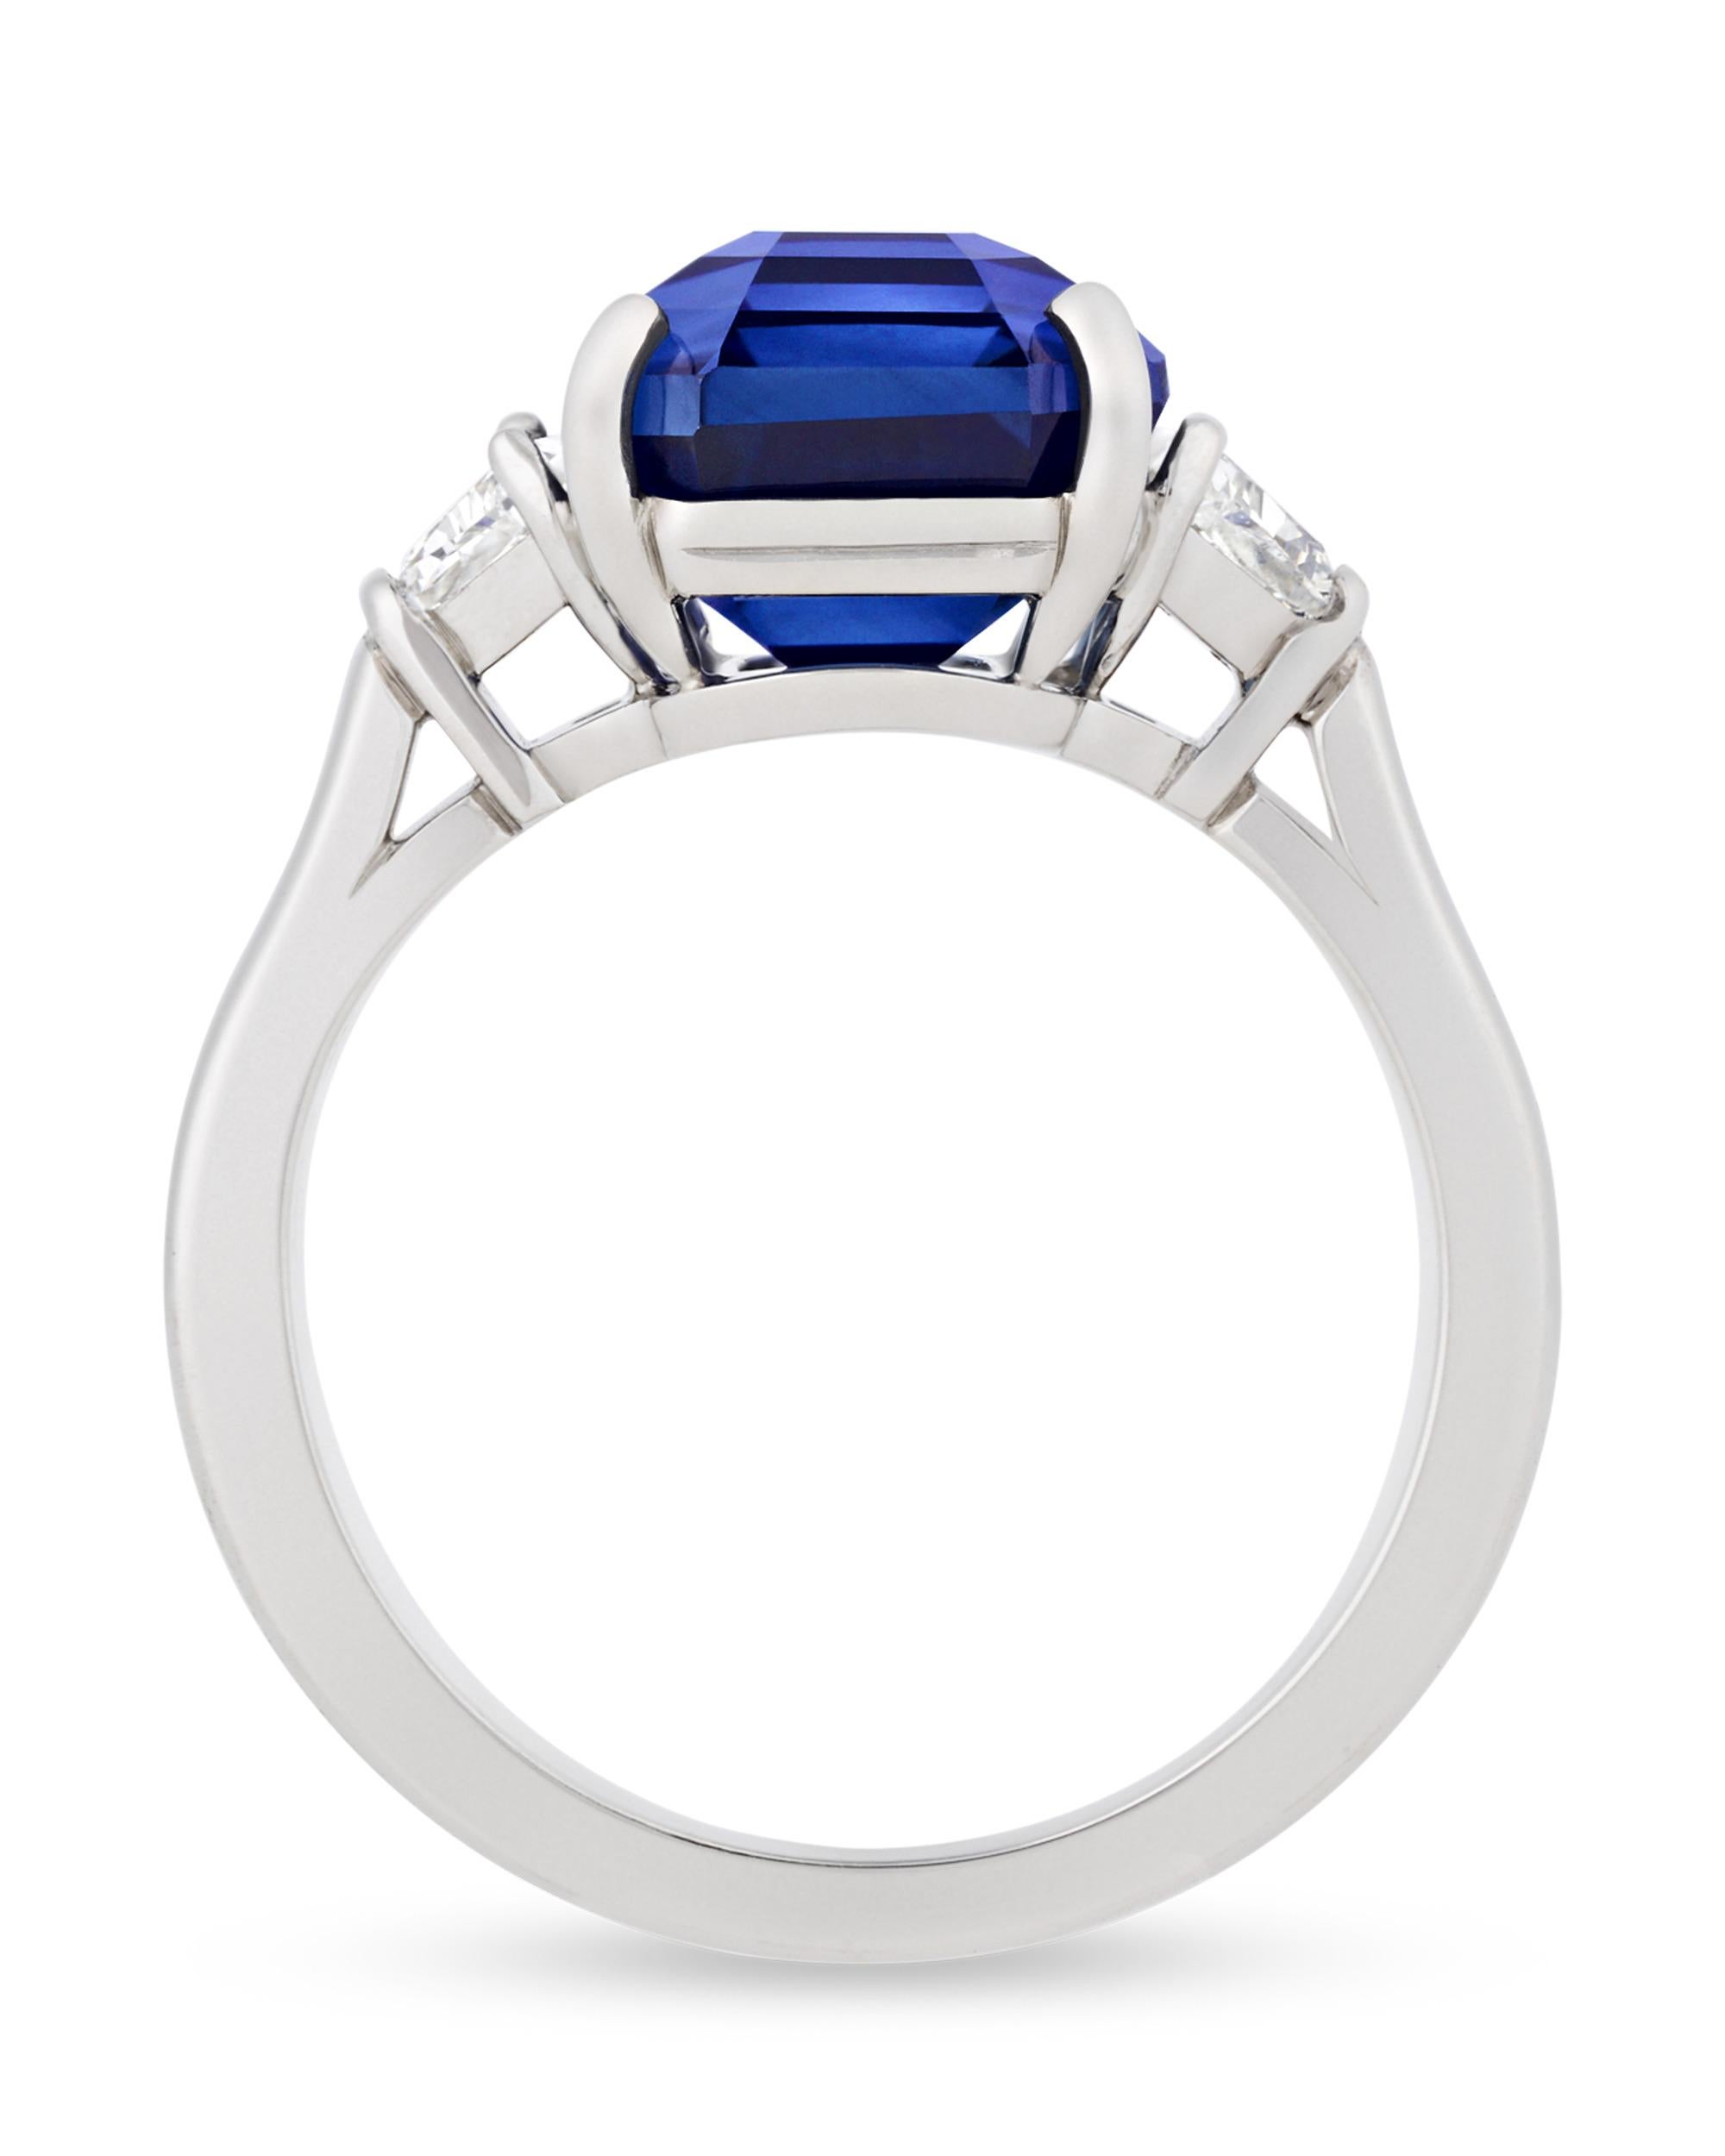 A 7.57-carat Ceylon sapphire displays its coveted royal blue hue at the center of this ring by the celebrated Oscar Heyman. Ceylon sapphires stand among the most sought-after colored gemstones and are highly treasured among gem collectors for their